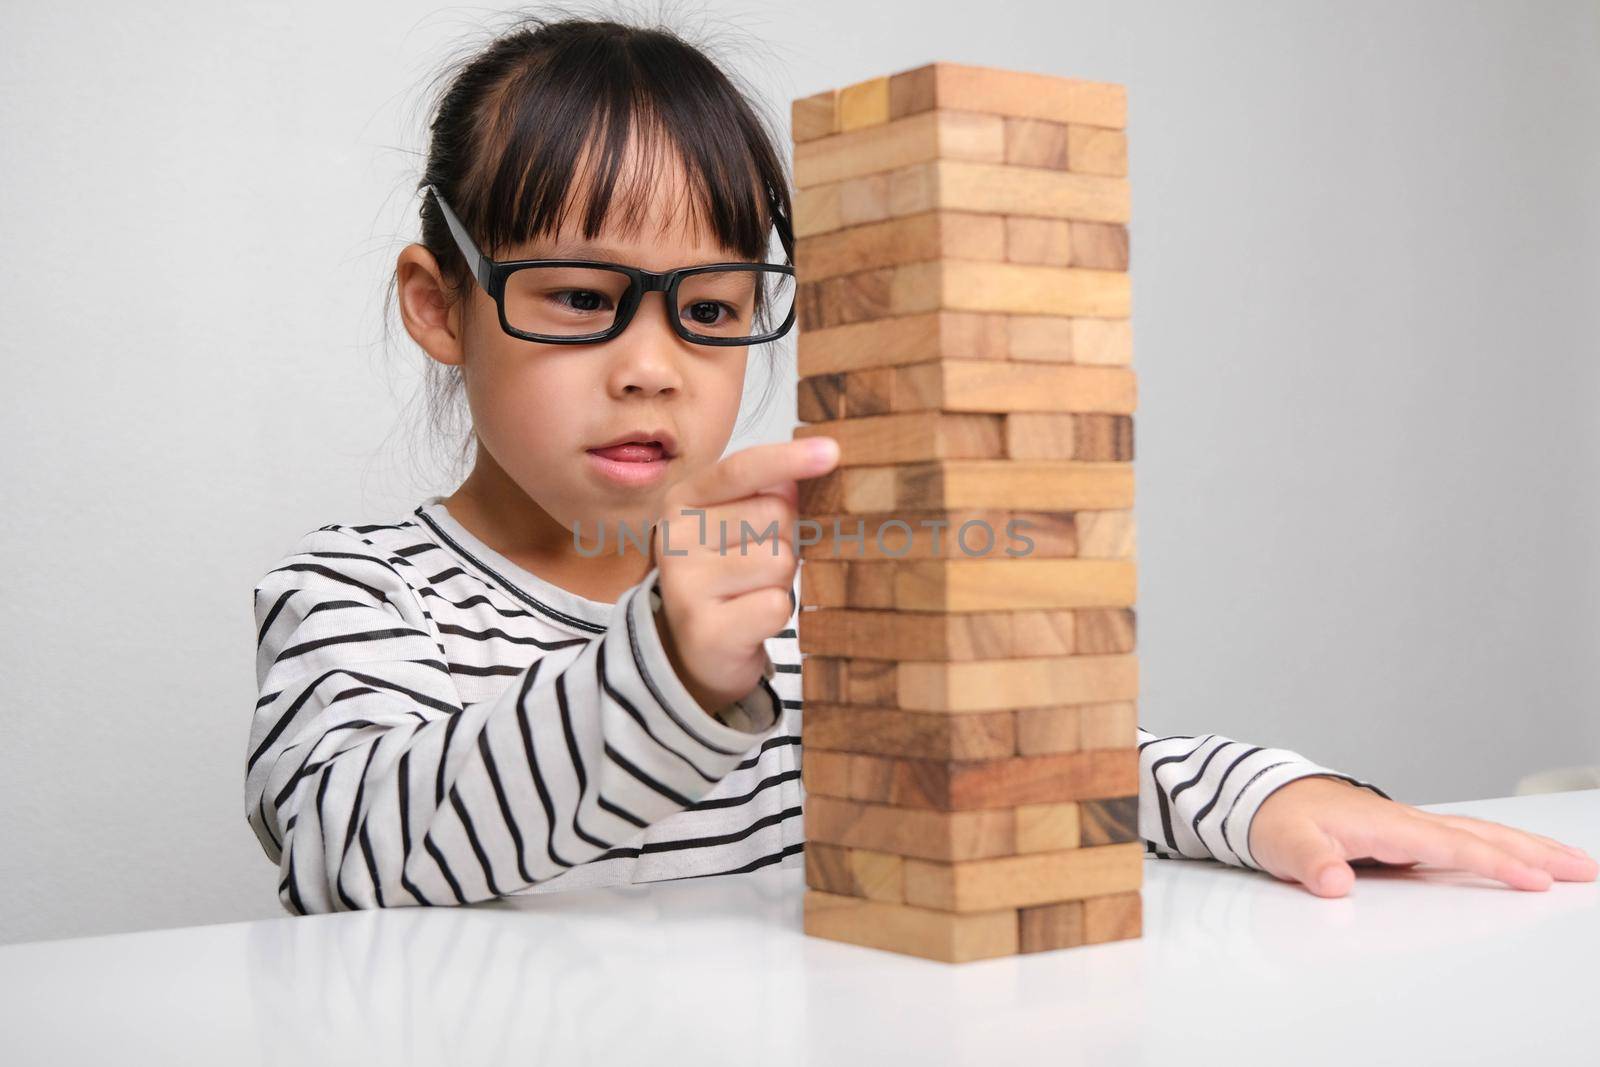 Asian children playing wooden blocks on table at home. Cute little girl having fun playing with building blocks. Wooden block tower building game. Toys for the development of children